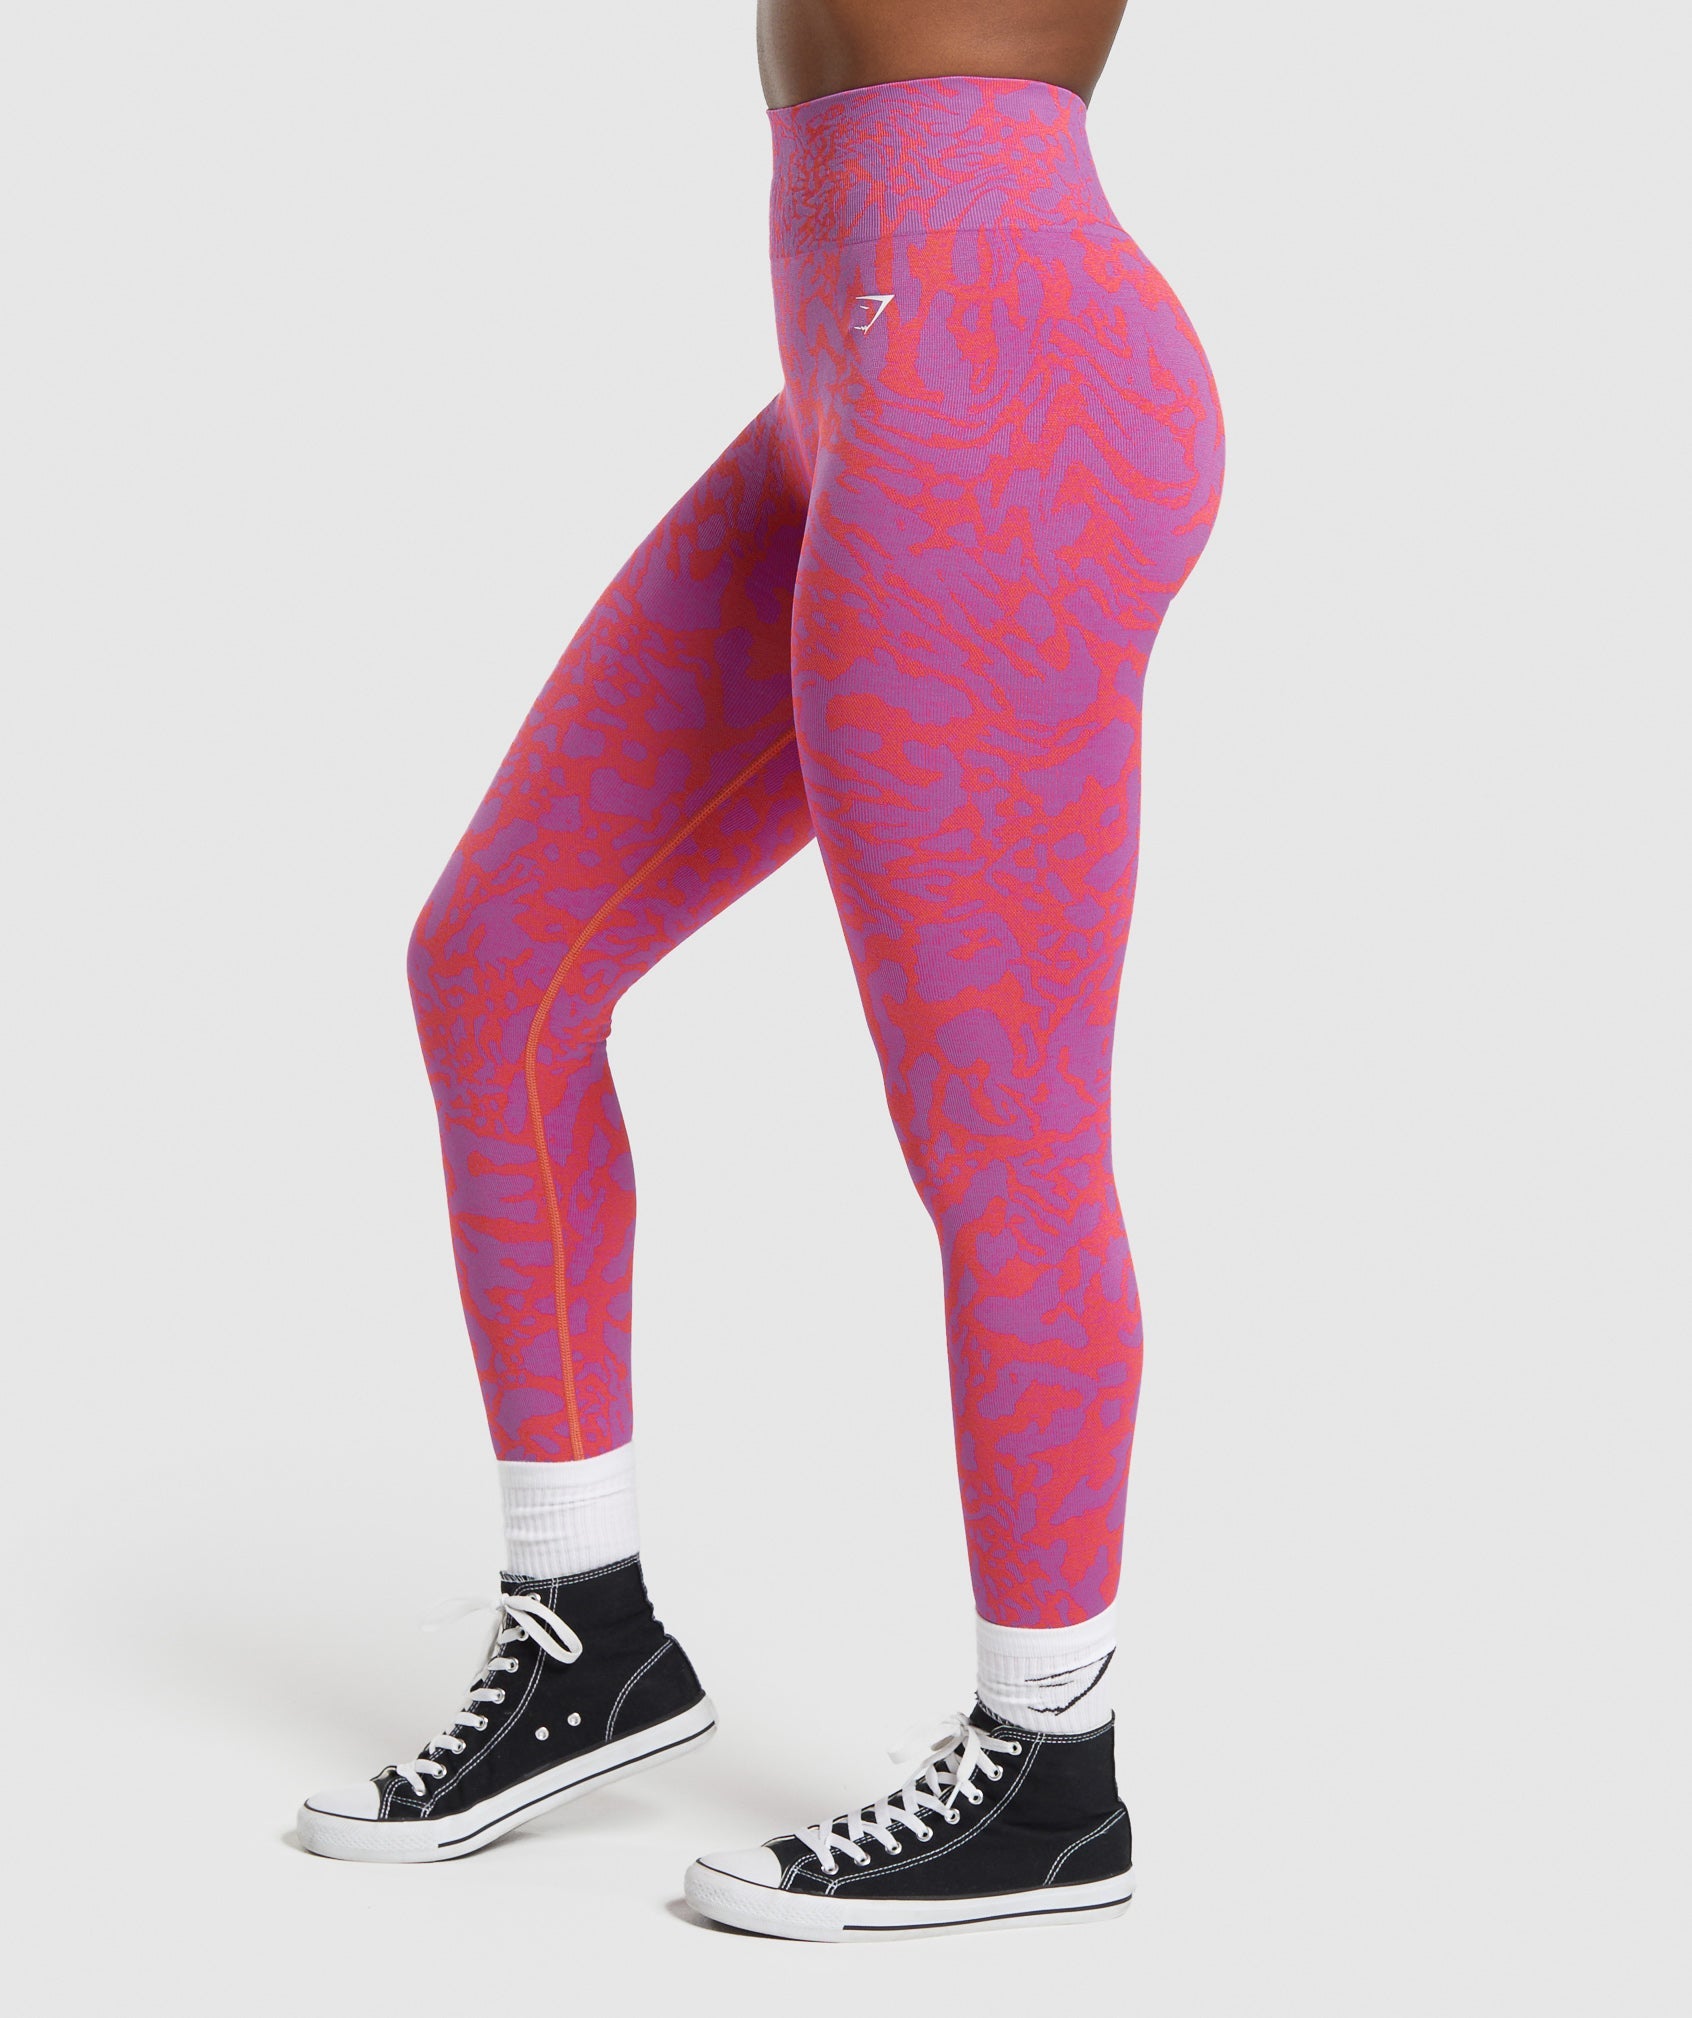 Adapt Safari Seamless Leggings in Shelly Pink/Fly Coral - view 3